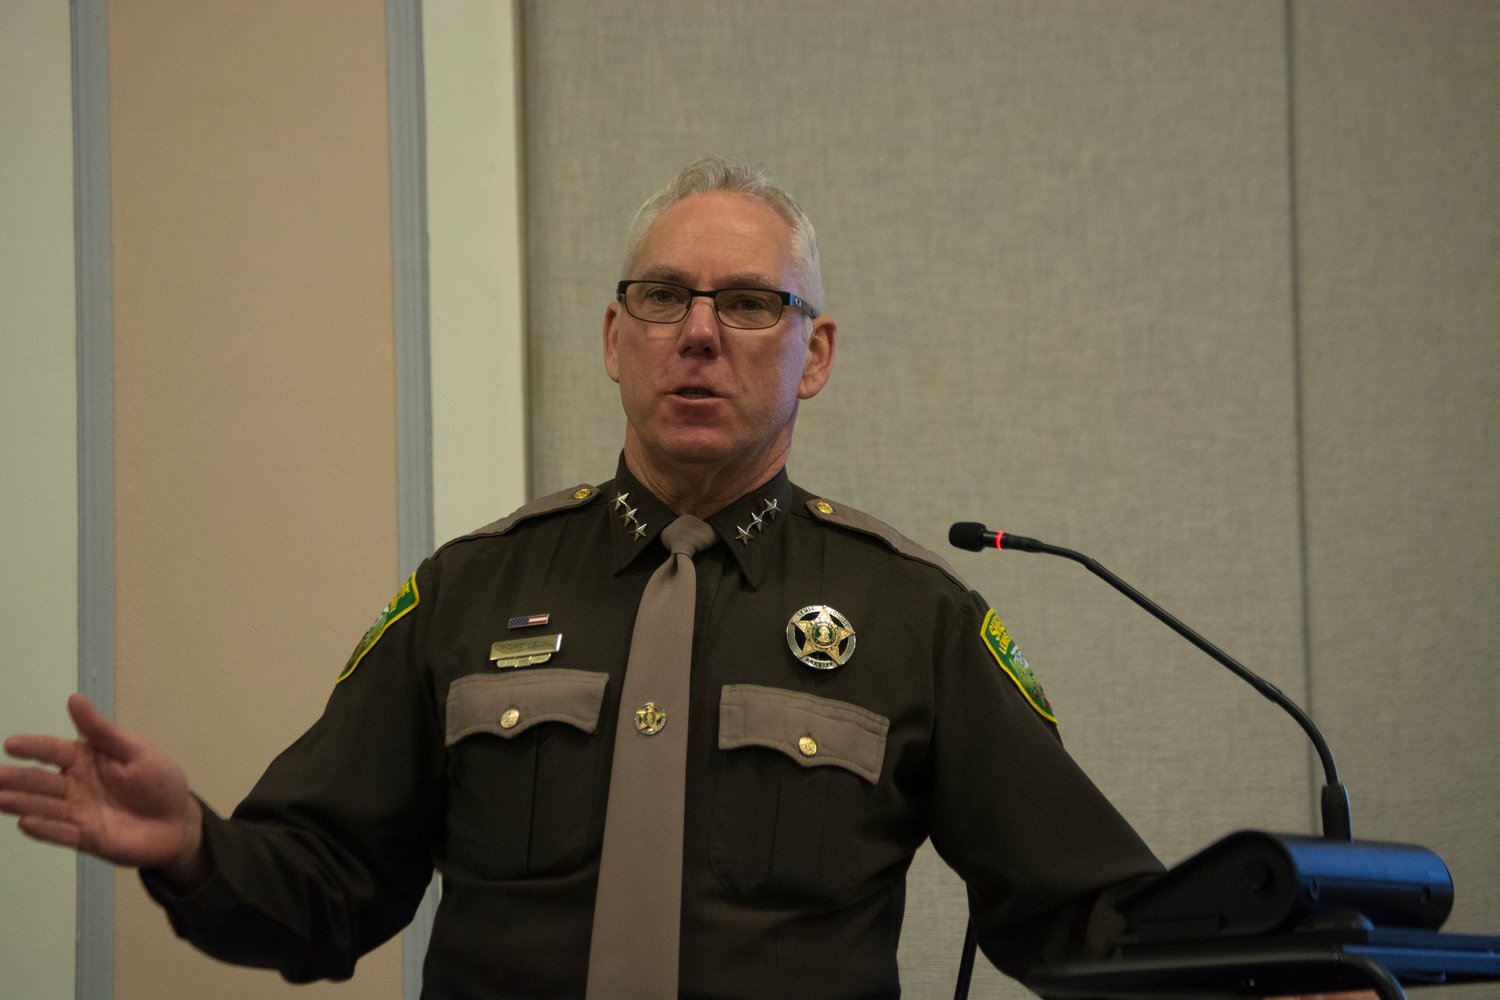 FILE PHOTO — Sheriff Rob Snaza addresses the audience during January's approval of Law Enforcement Appreciation Day at the Historic Courthouse.